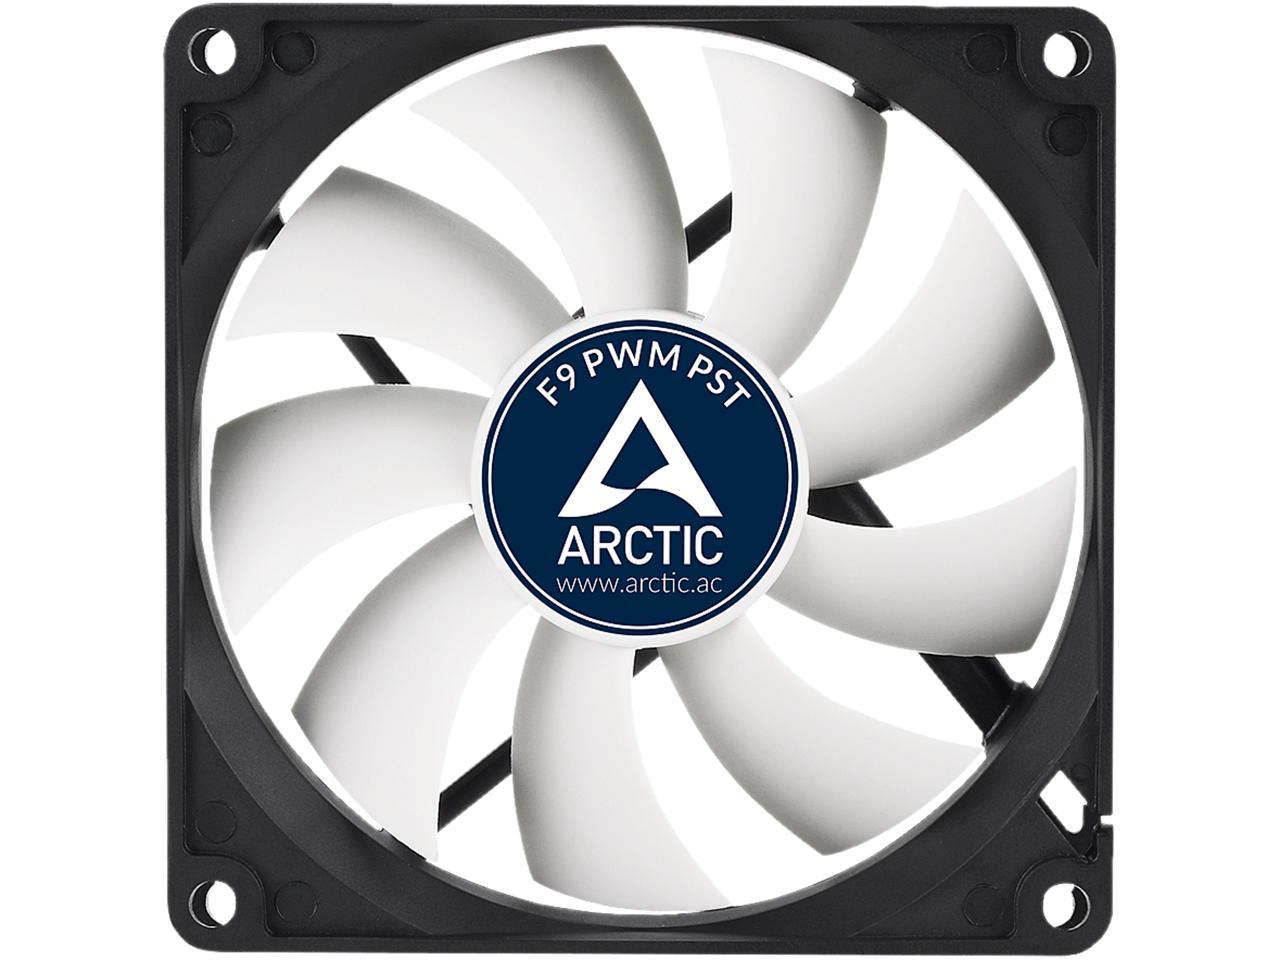 Arctic F9 Pwm Pst - Standard Low Noise Pwm Controlled Case Fan With Pst Feature, Afaco-090P0-Gba01